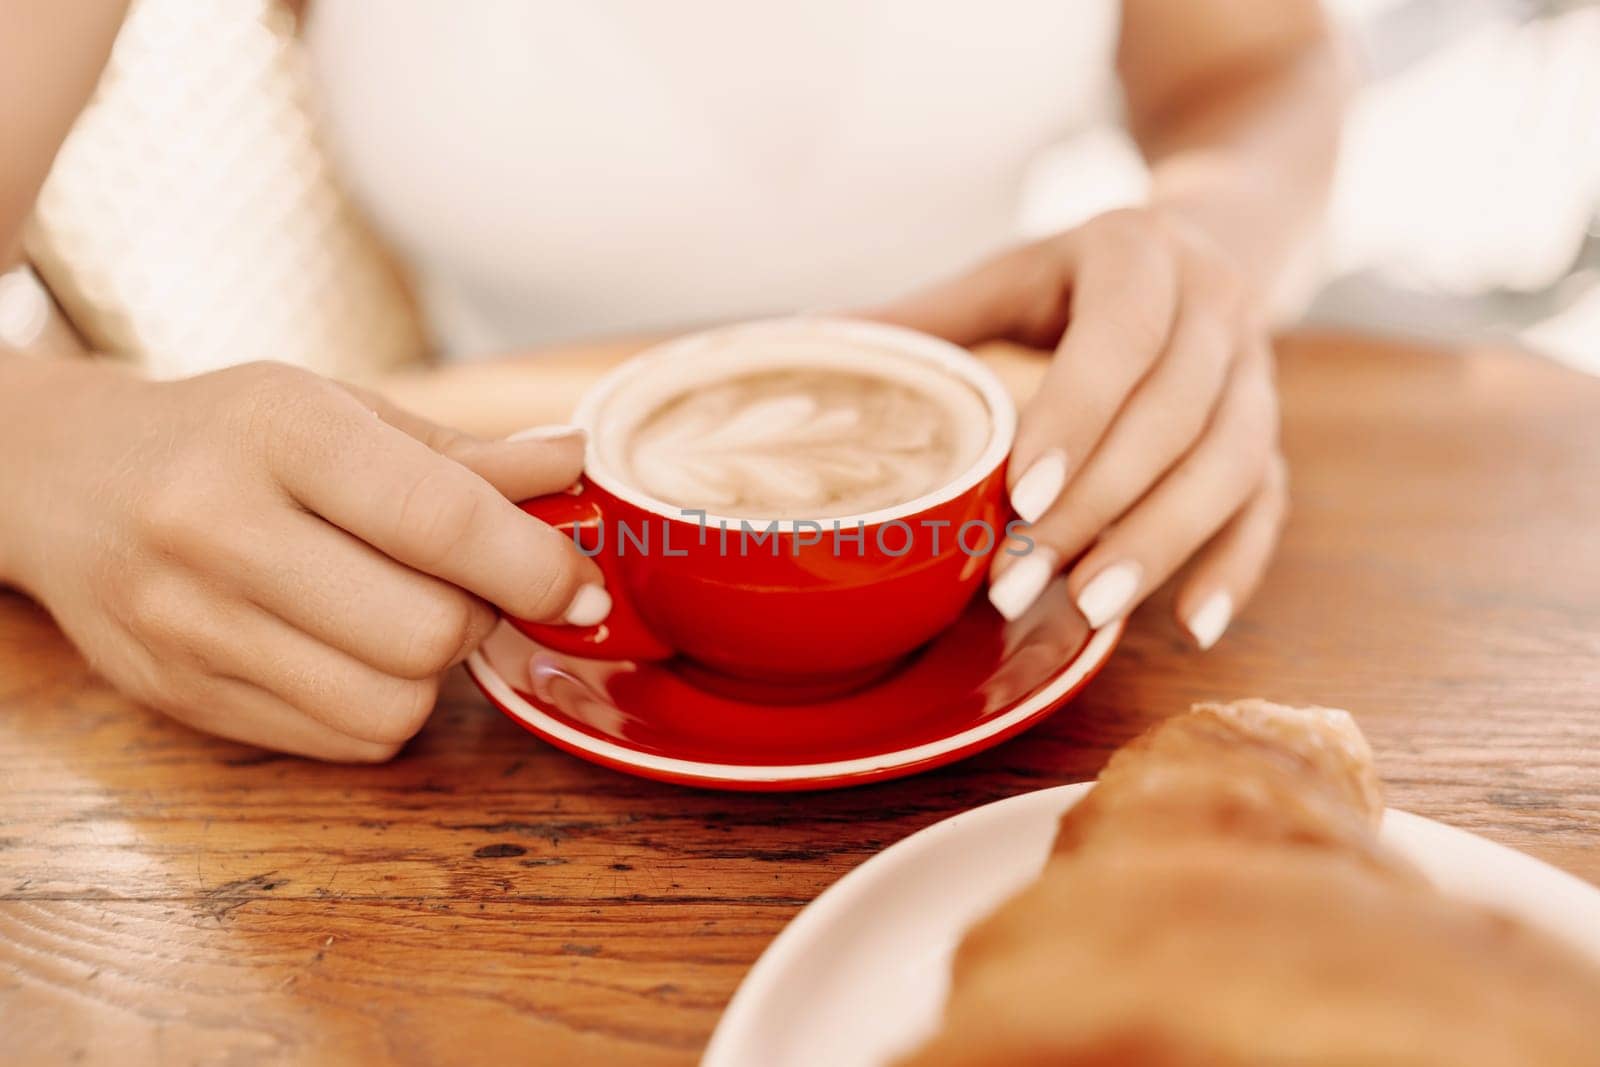 A woman is holding a red coffee cup with a white saucer. The woman is sitting at a table with a plate of croissants in front of her